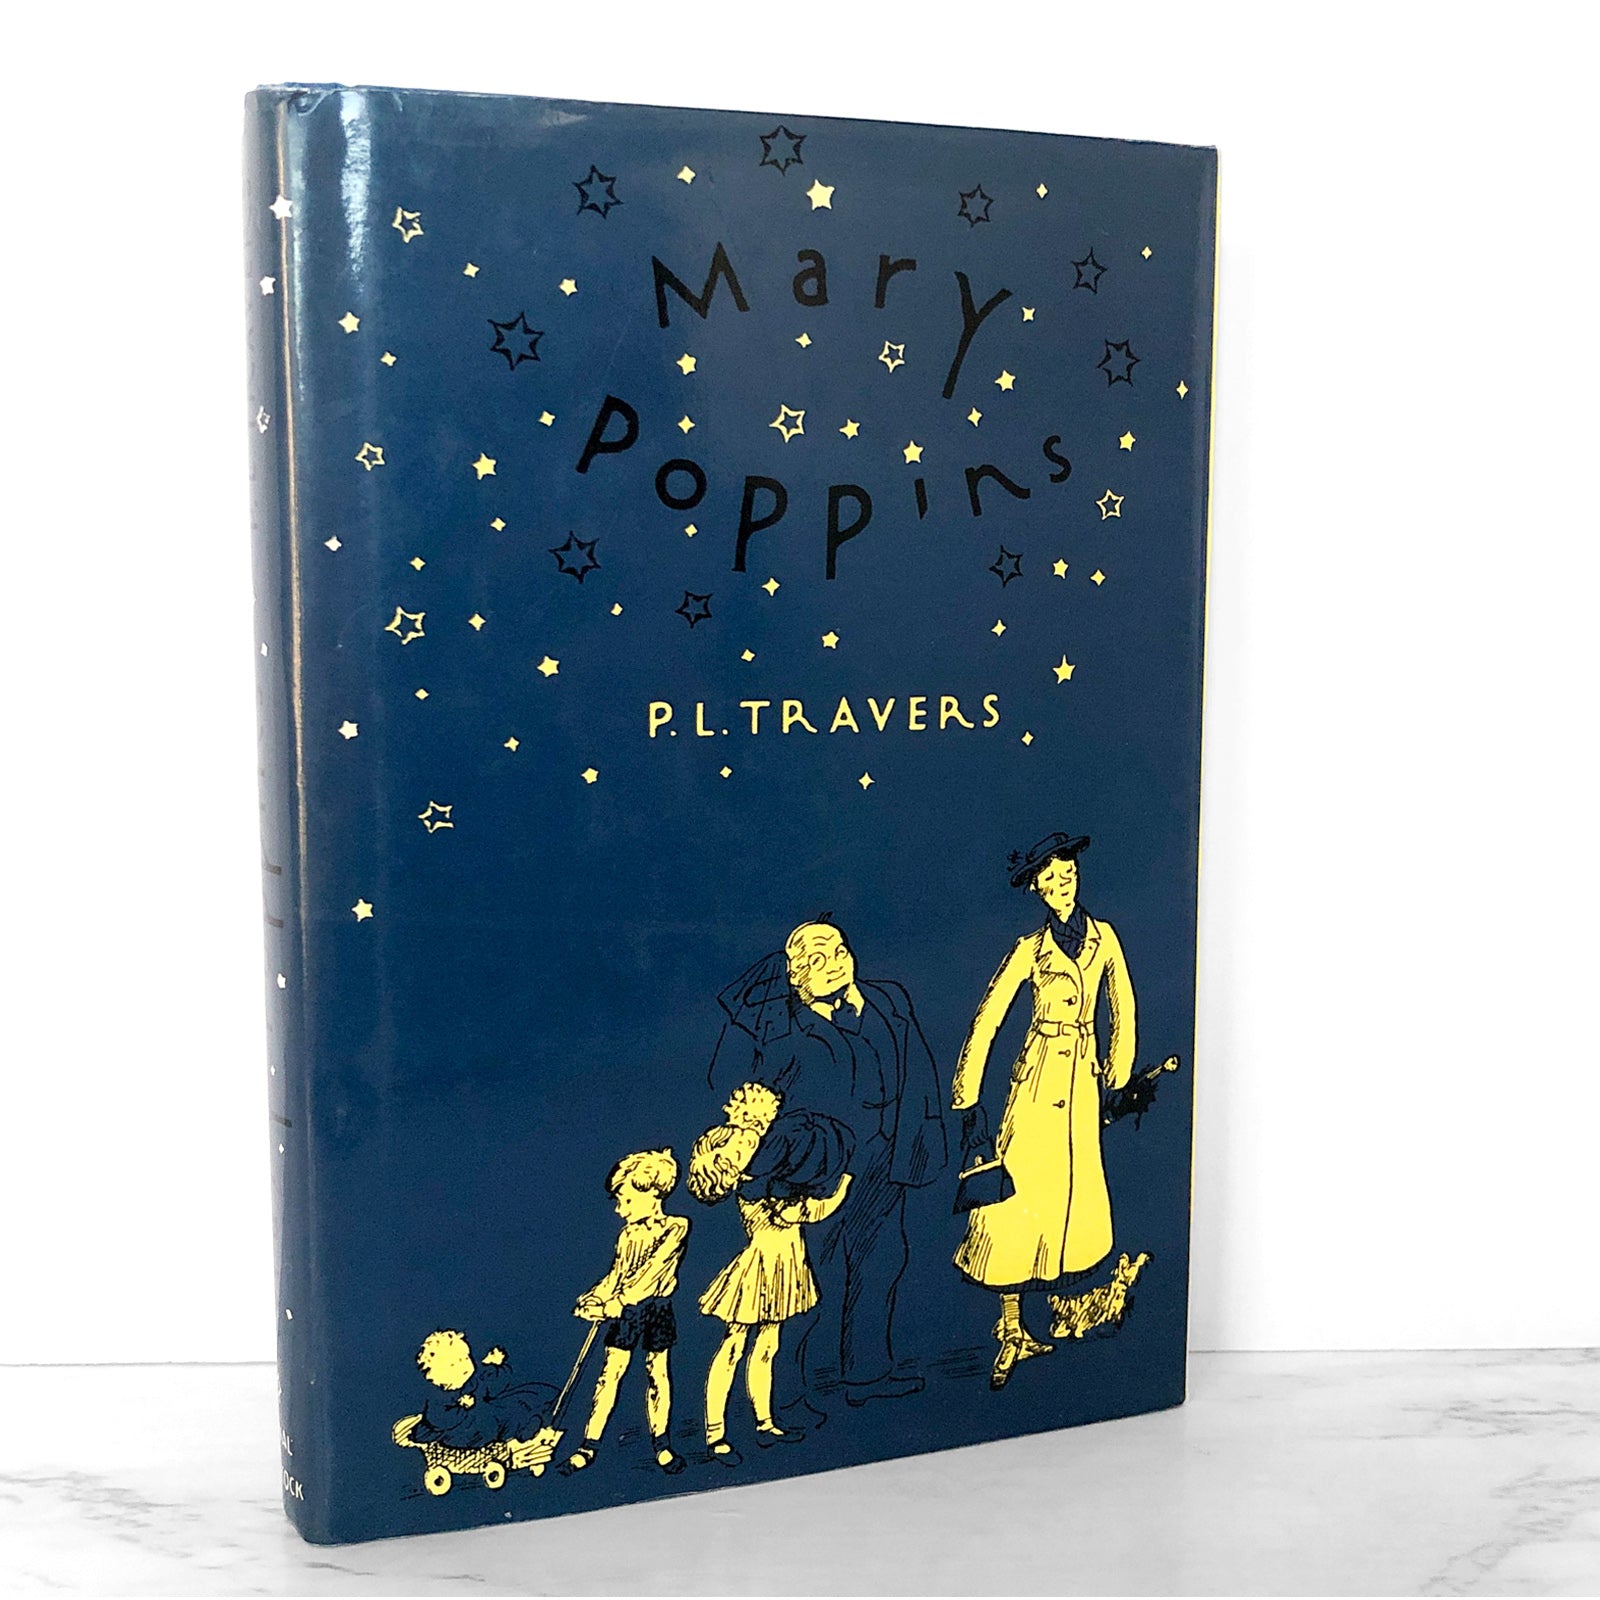 Mary Poppins (Mary Poppins, #1) by P.L. Travers